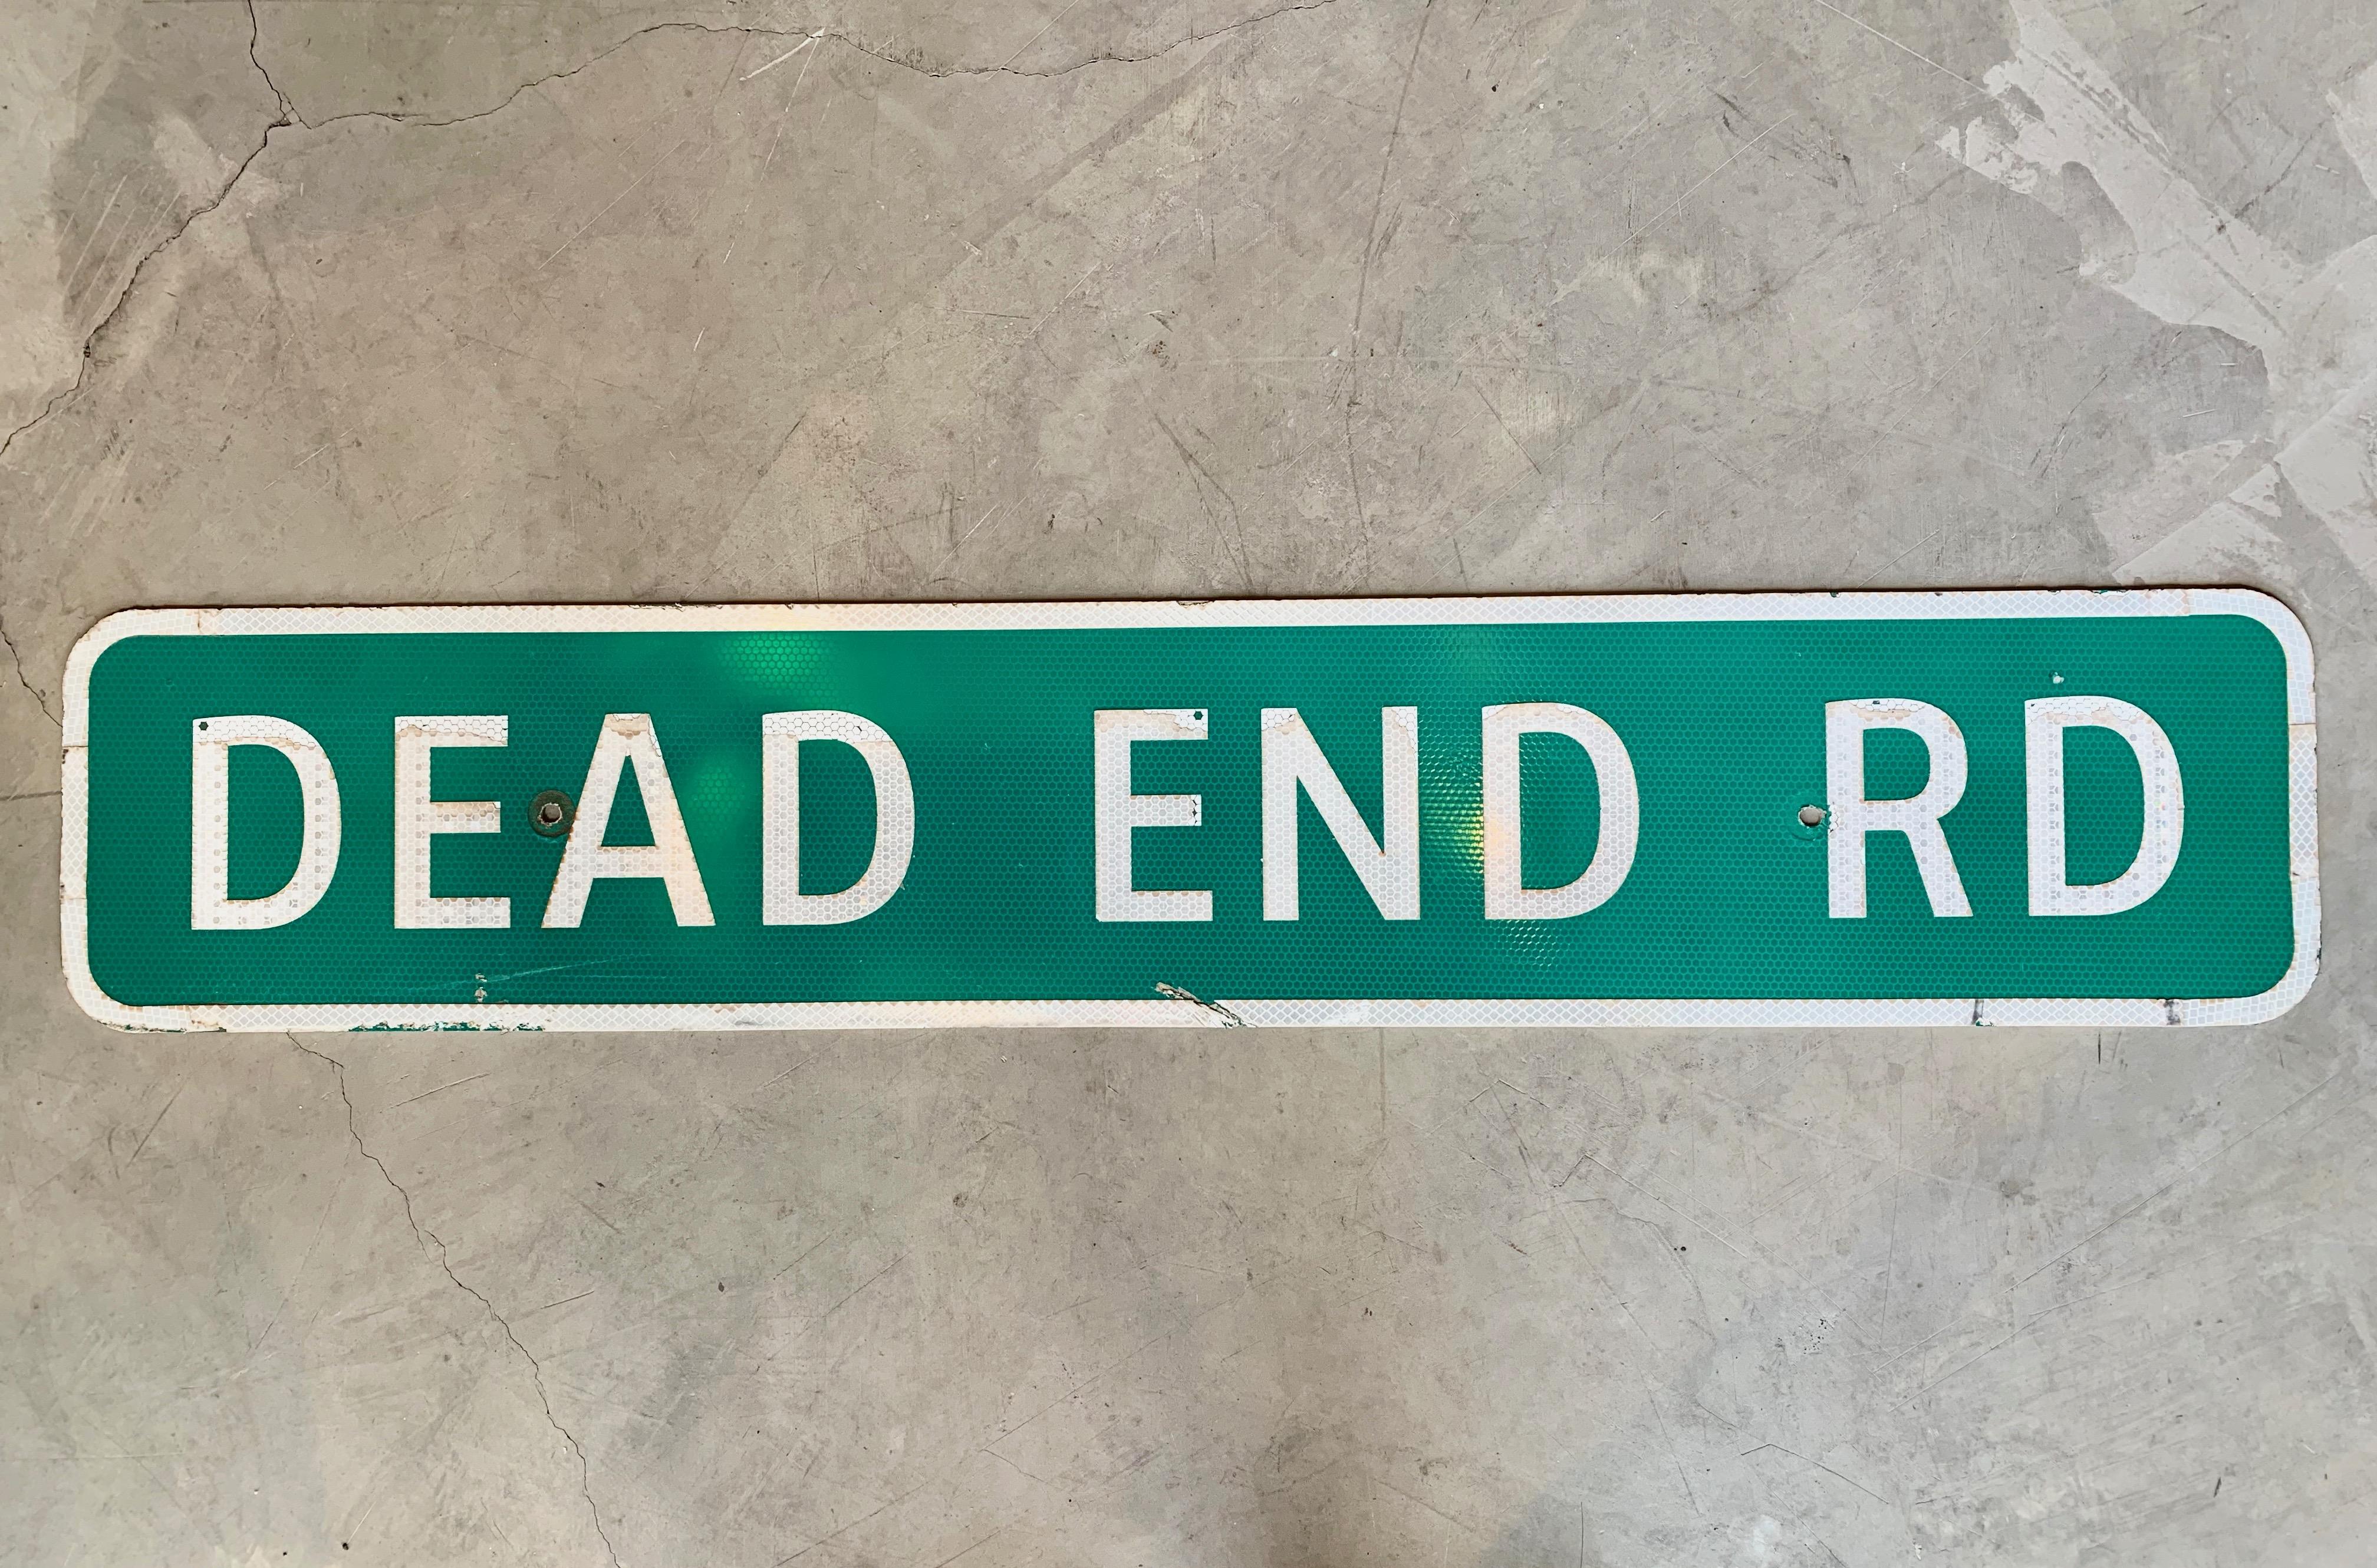 Vintage highway sign. Dead End Rd. Over 3 feet long. Cool vintage sign with good subject matter. Reflective material.